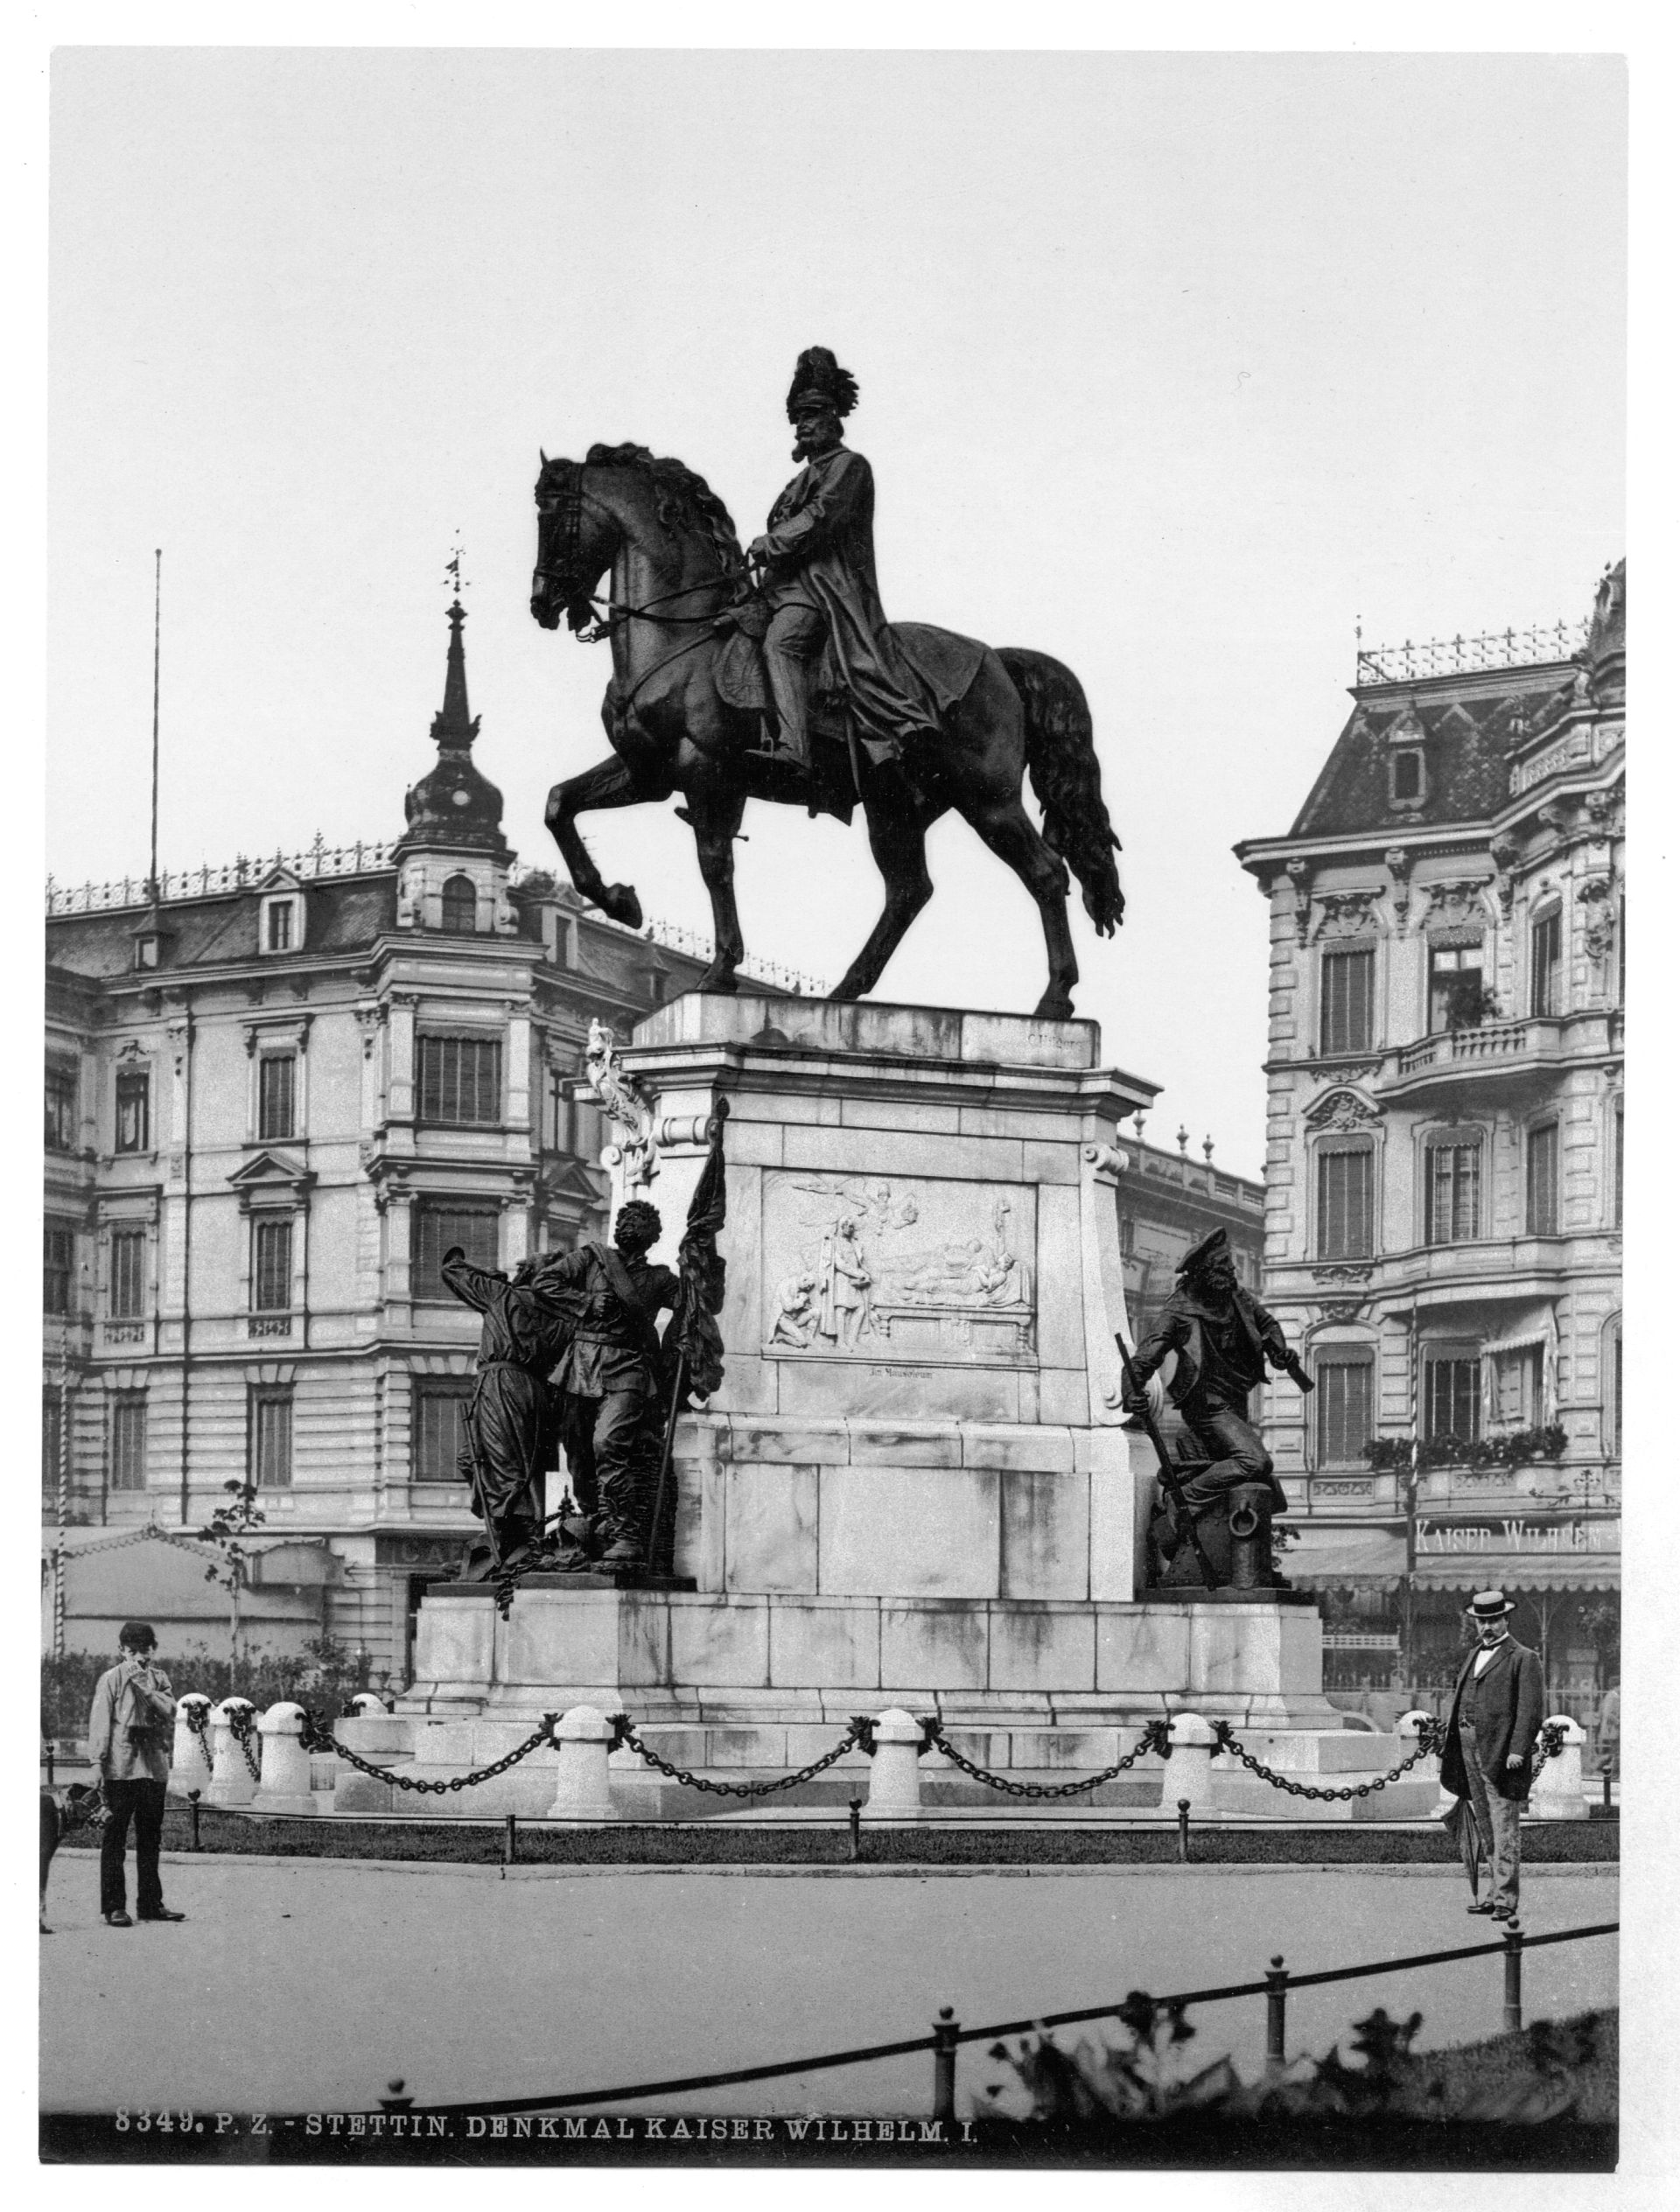 The Monument of Emperor William I, Stettin, Germany